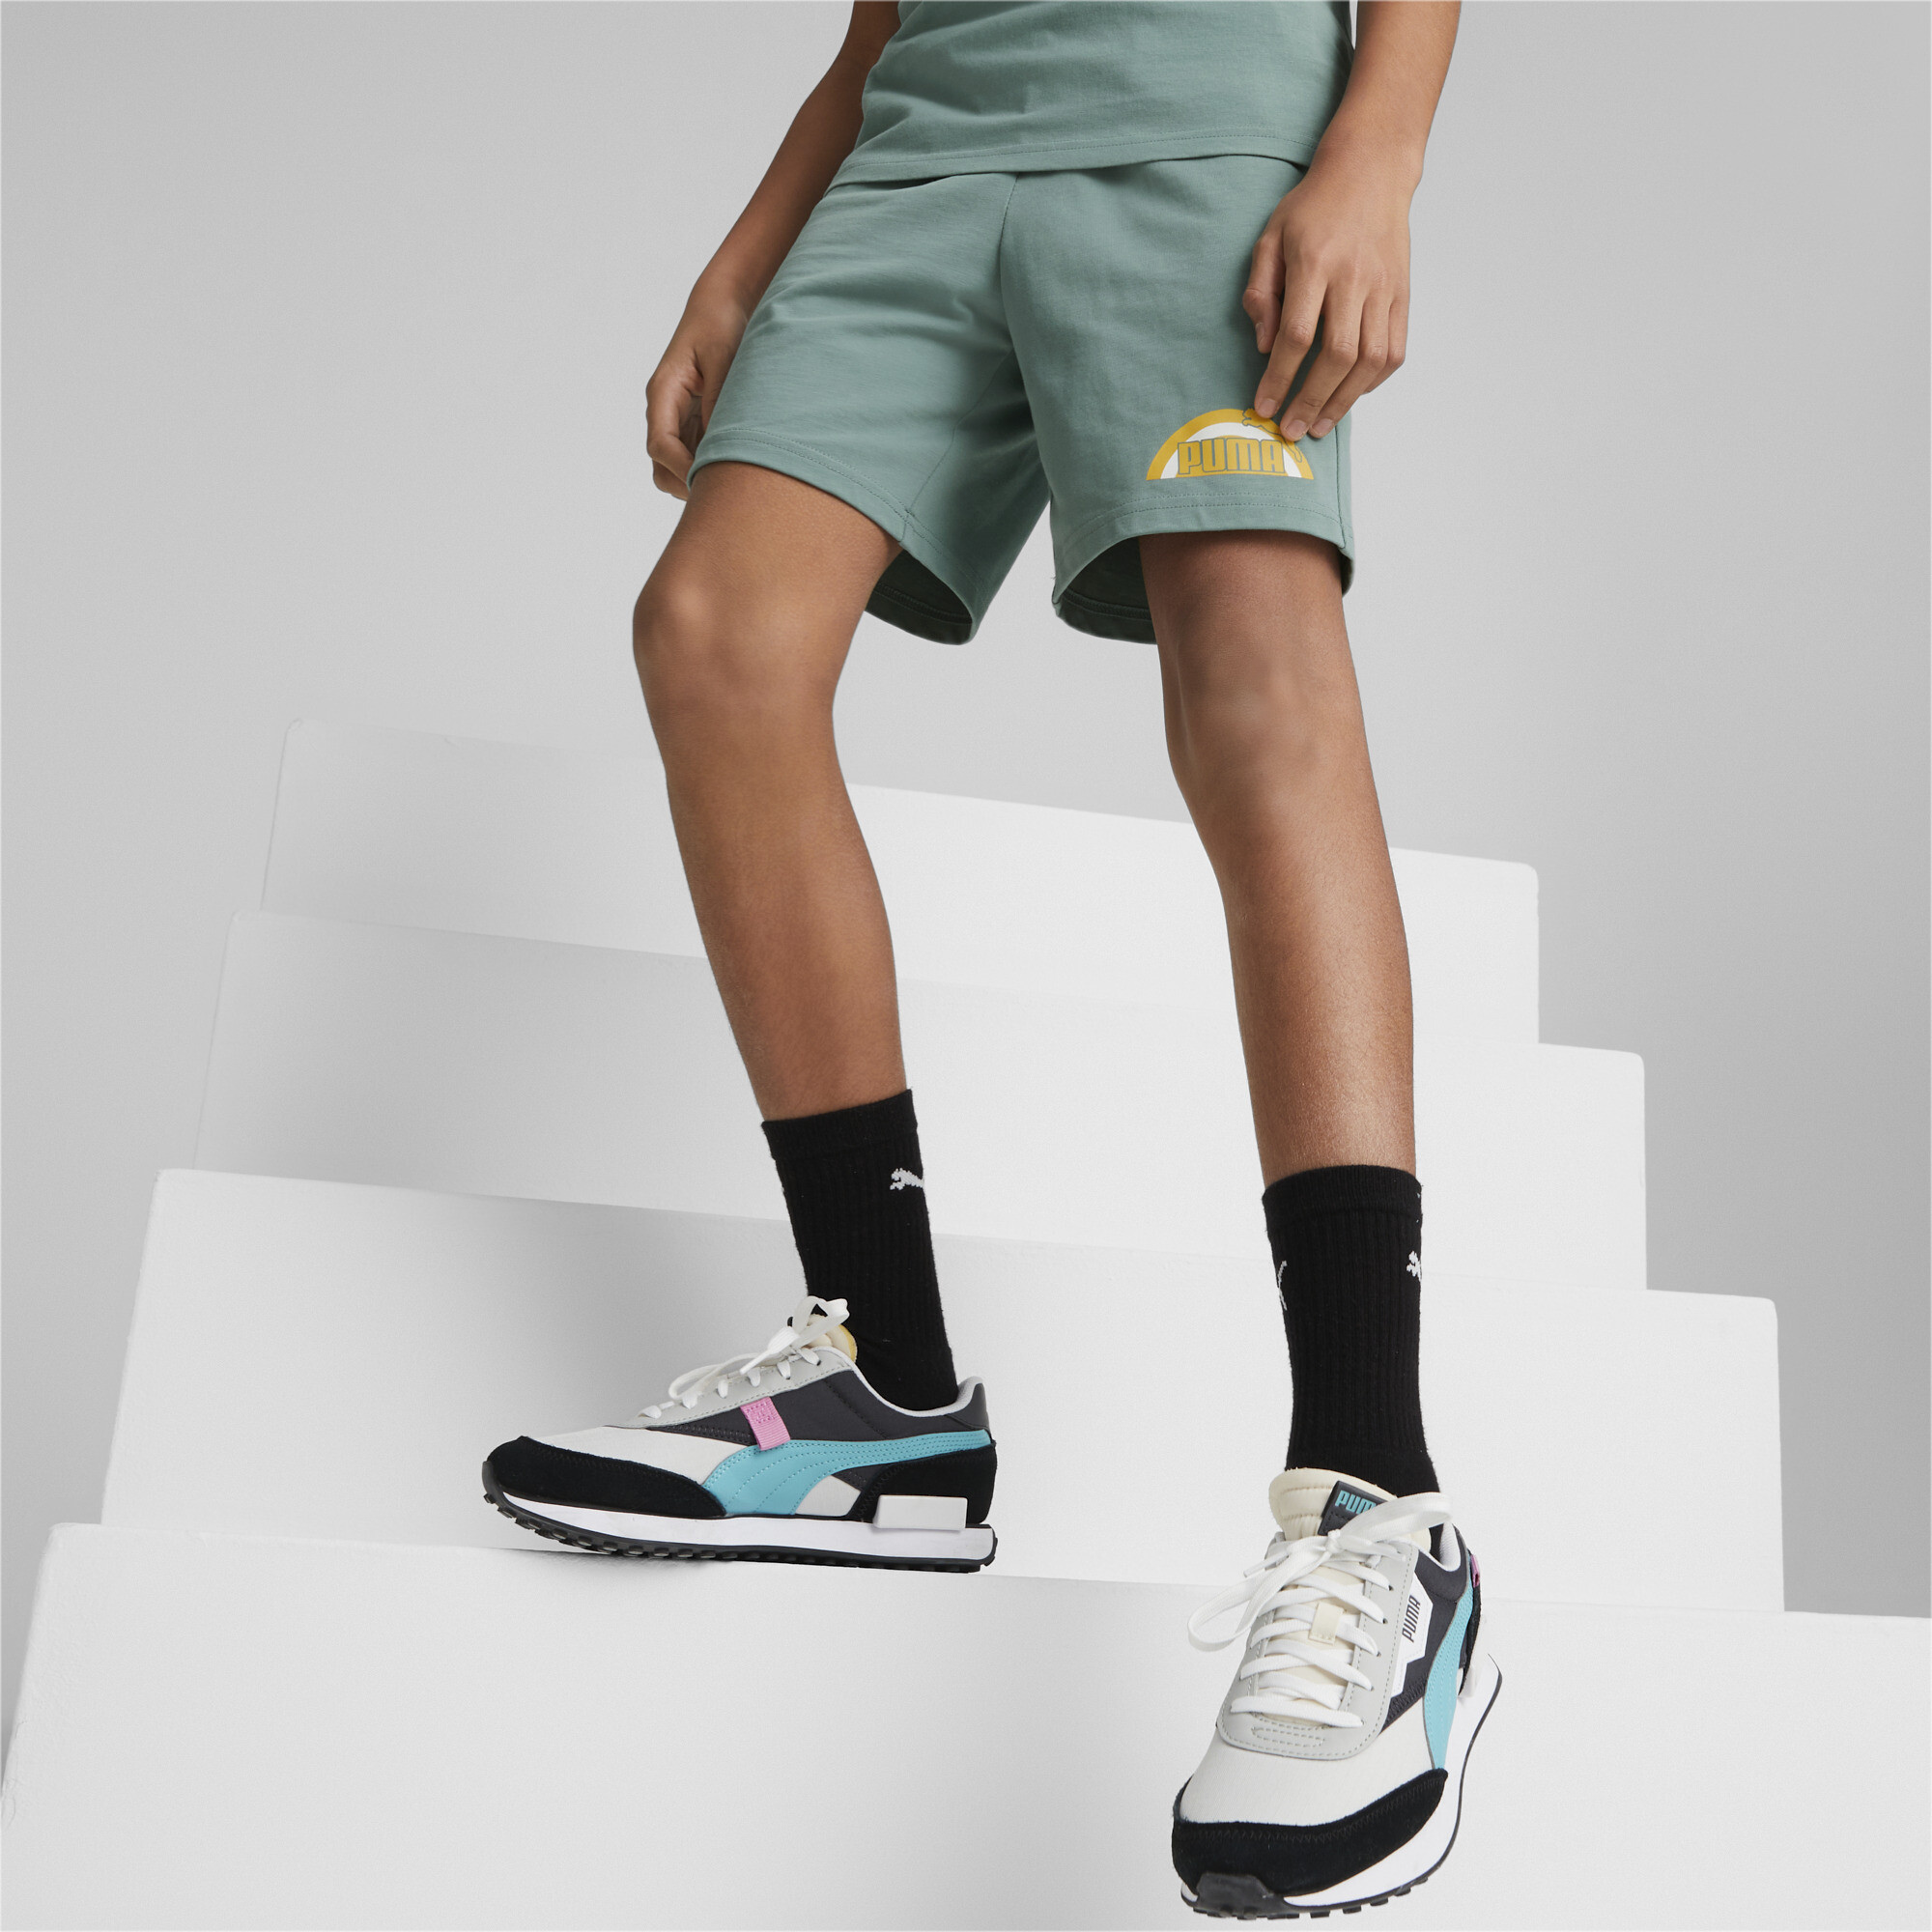 PUMA Essentials+ Street Art Shorts In Gray, Size 4-5 Youth